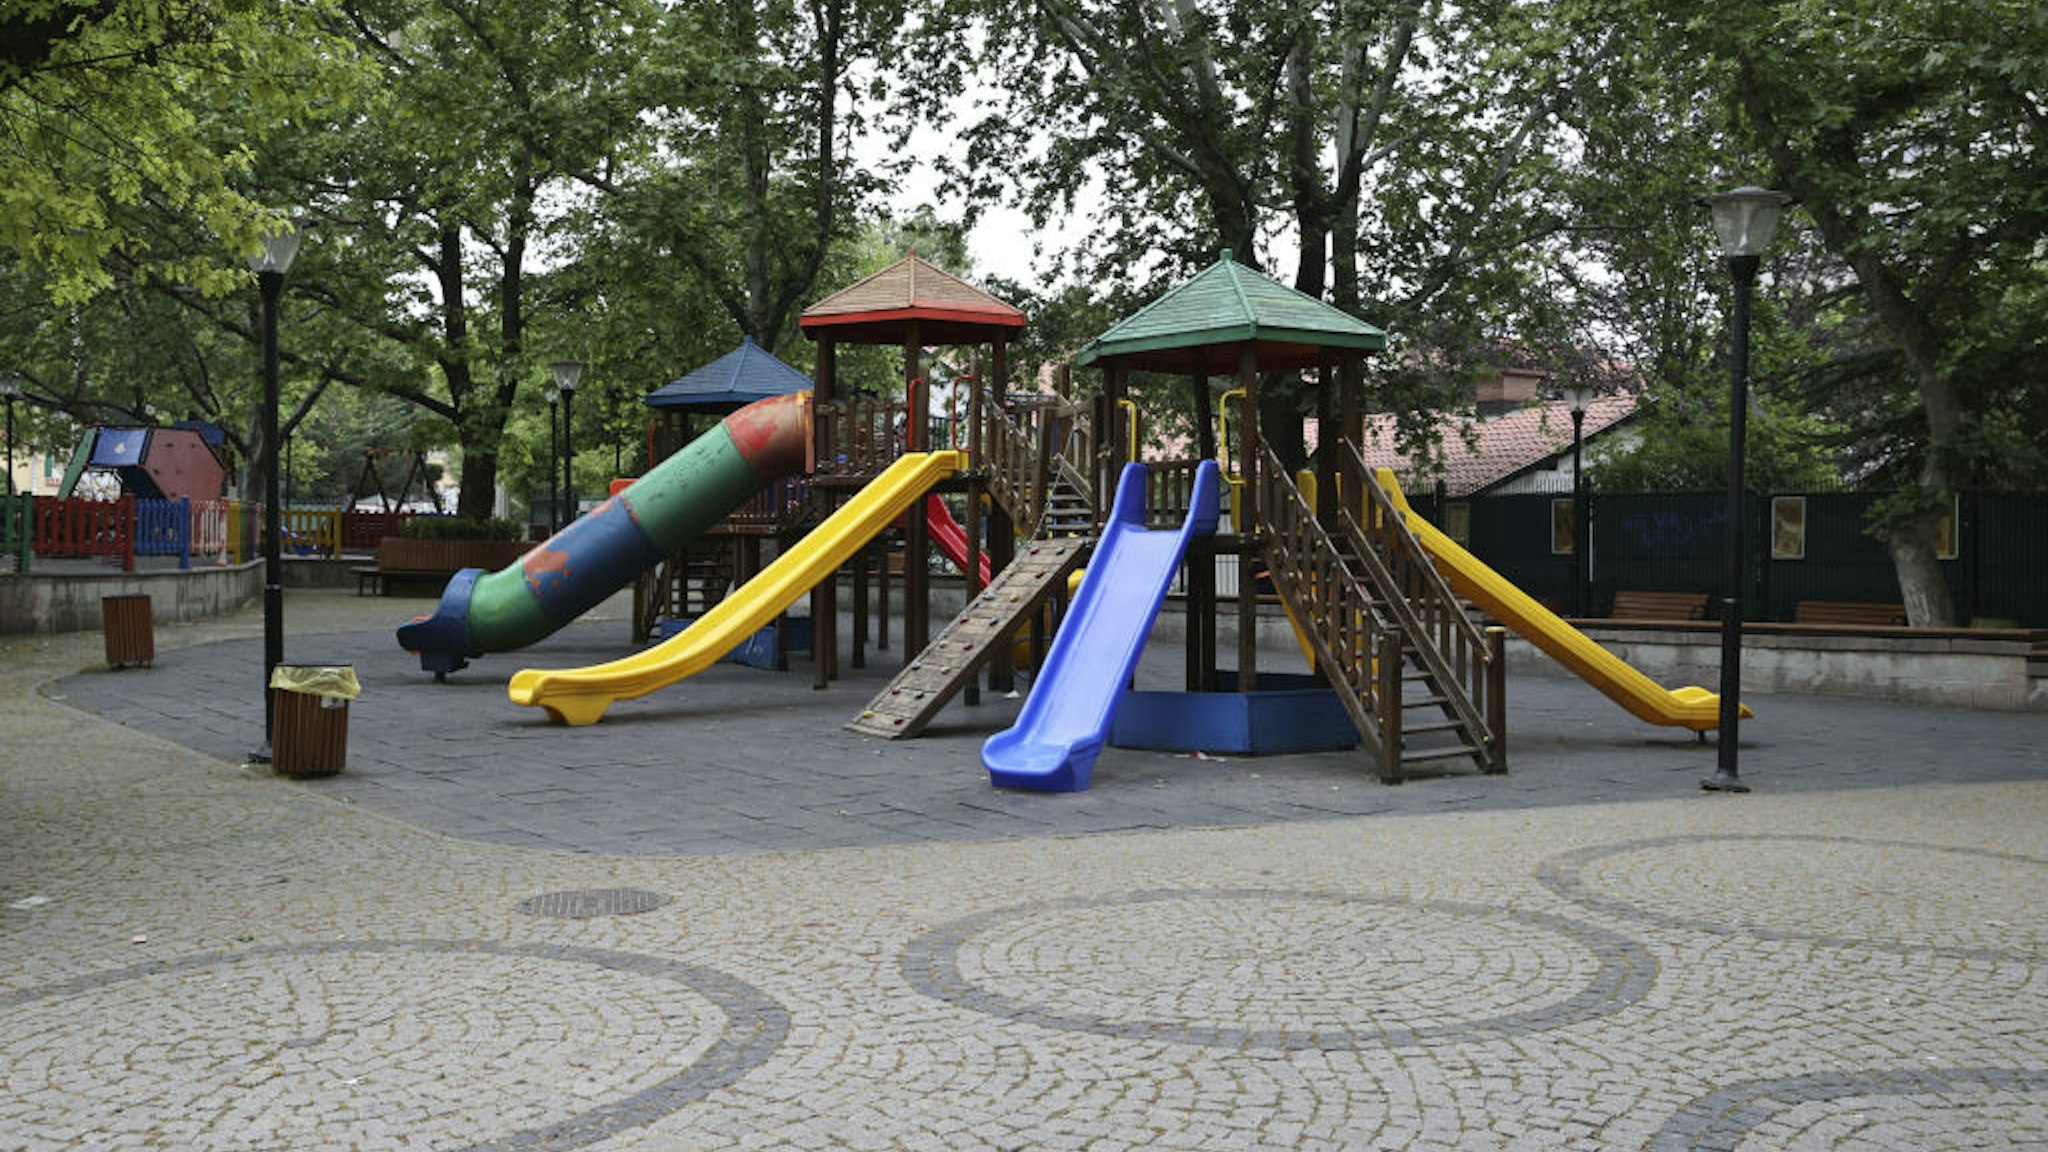 ANKARA, TURKEY - MAY 22: A view of empty playground on nationwide weekend curfew imposed from 9 p.m. local time on Friday and last until 5 a.m. on Monday as a measure for curbing the spread of the novel type of coronavirus (COVID-19) pandemic in Ankara, Turkey on May 22, 2021.